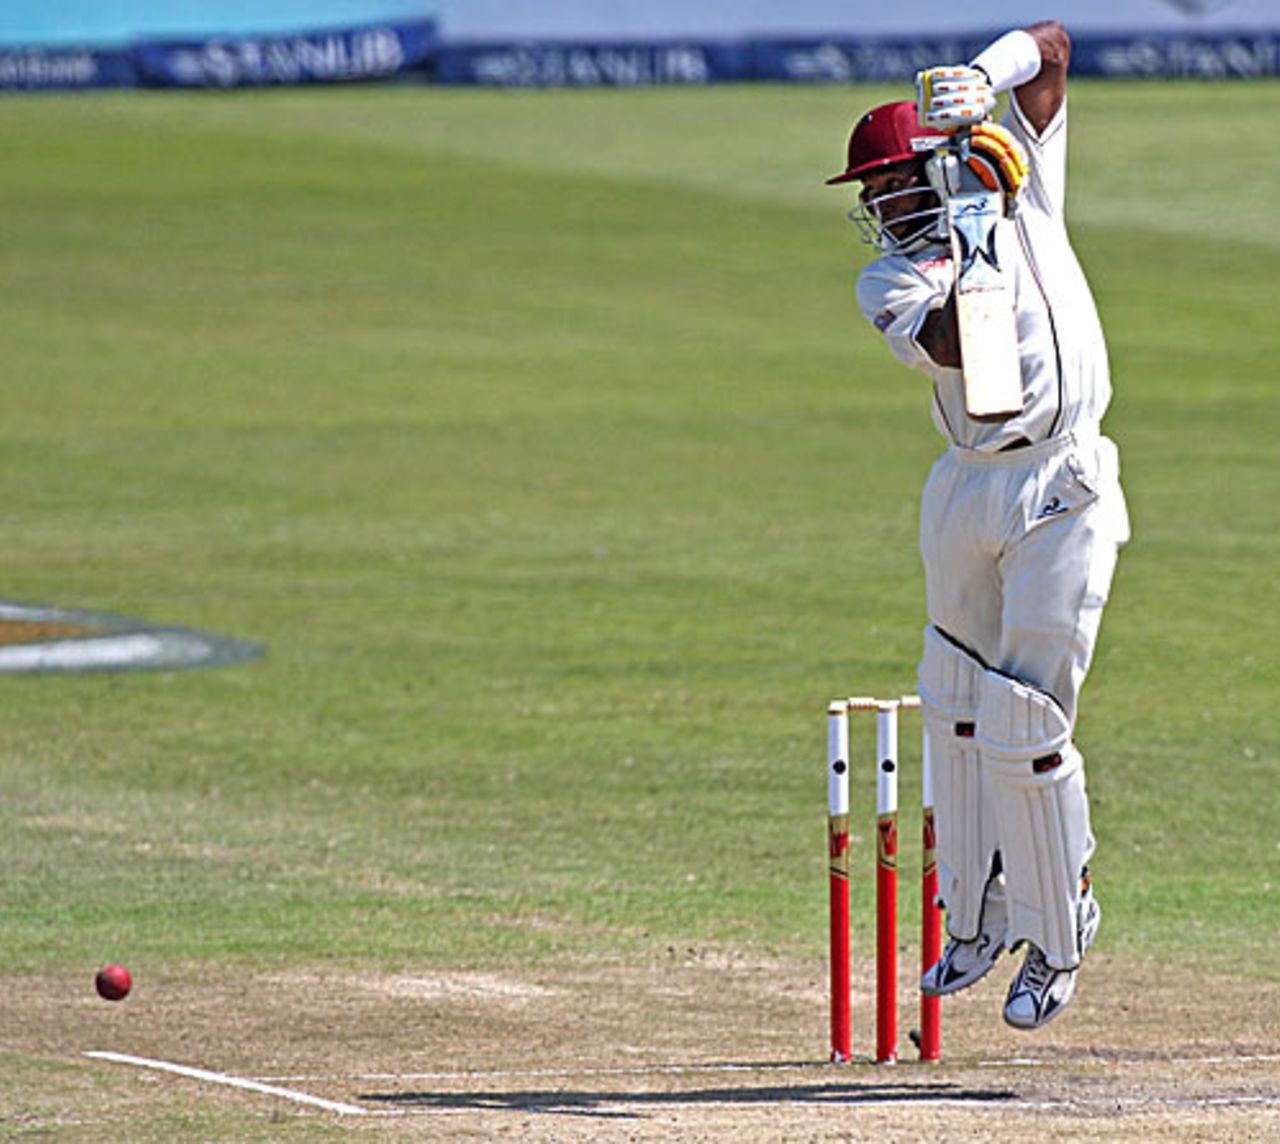 Dwayne Bravo jumps up and punches off the back foot, South Africa v West Indies, 3rd Test, Durban, 3rd day, January 12, 2008 